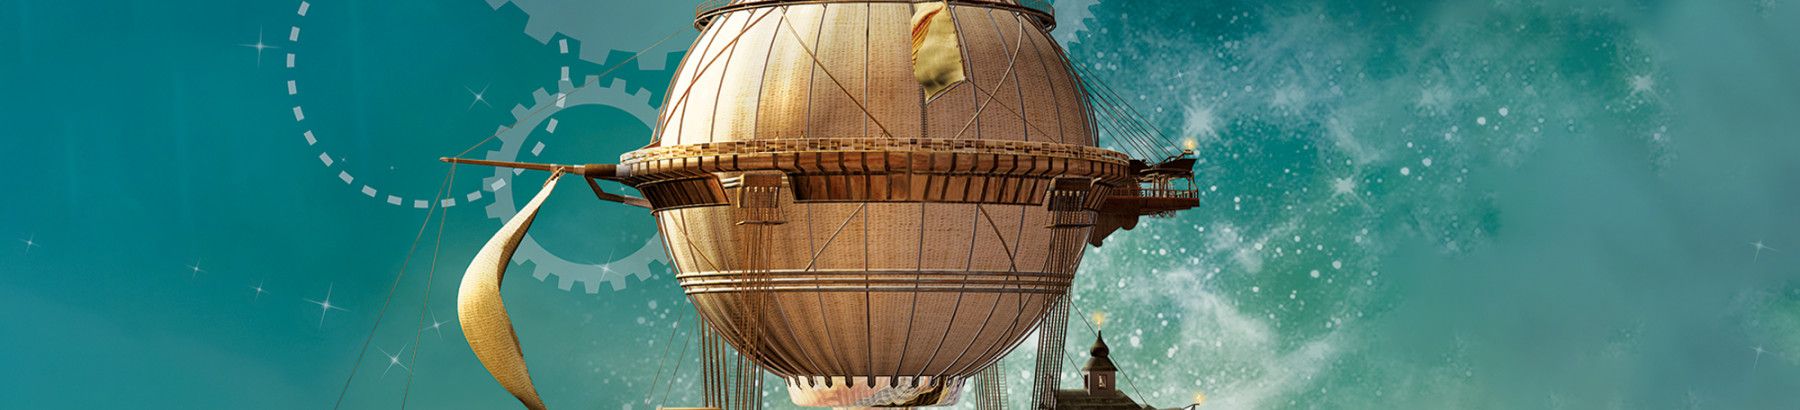 A steampunk balloon flying in the sky